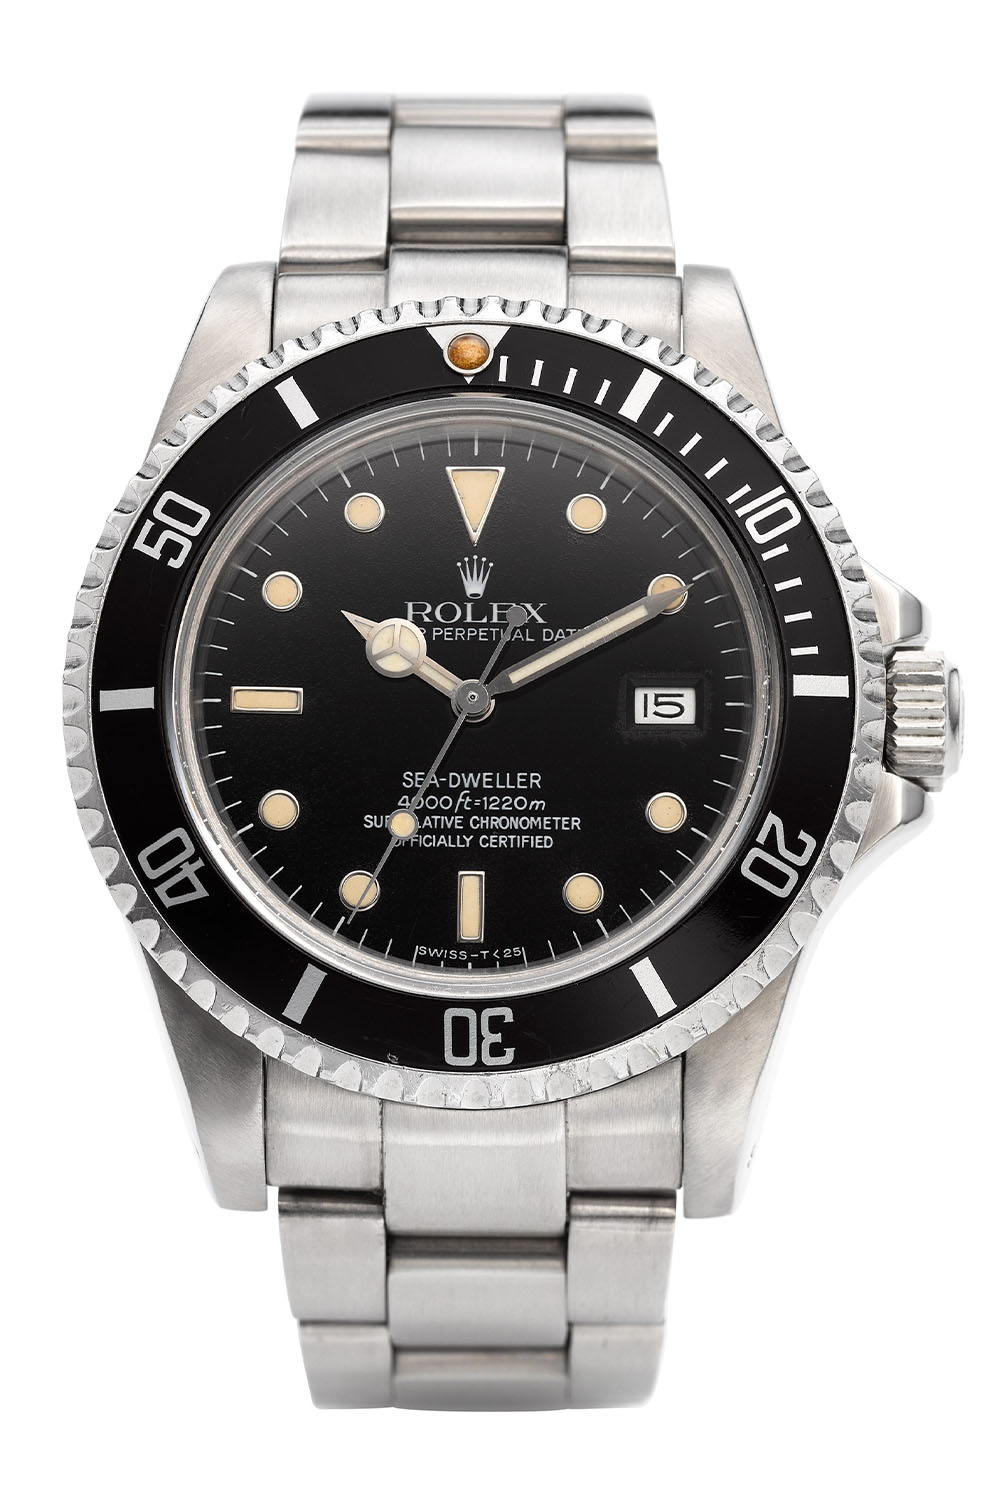 Rolex Sea-Dweller Triple Six reference 16660 - image by Christie's